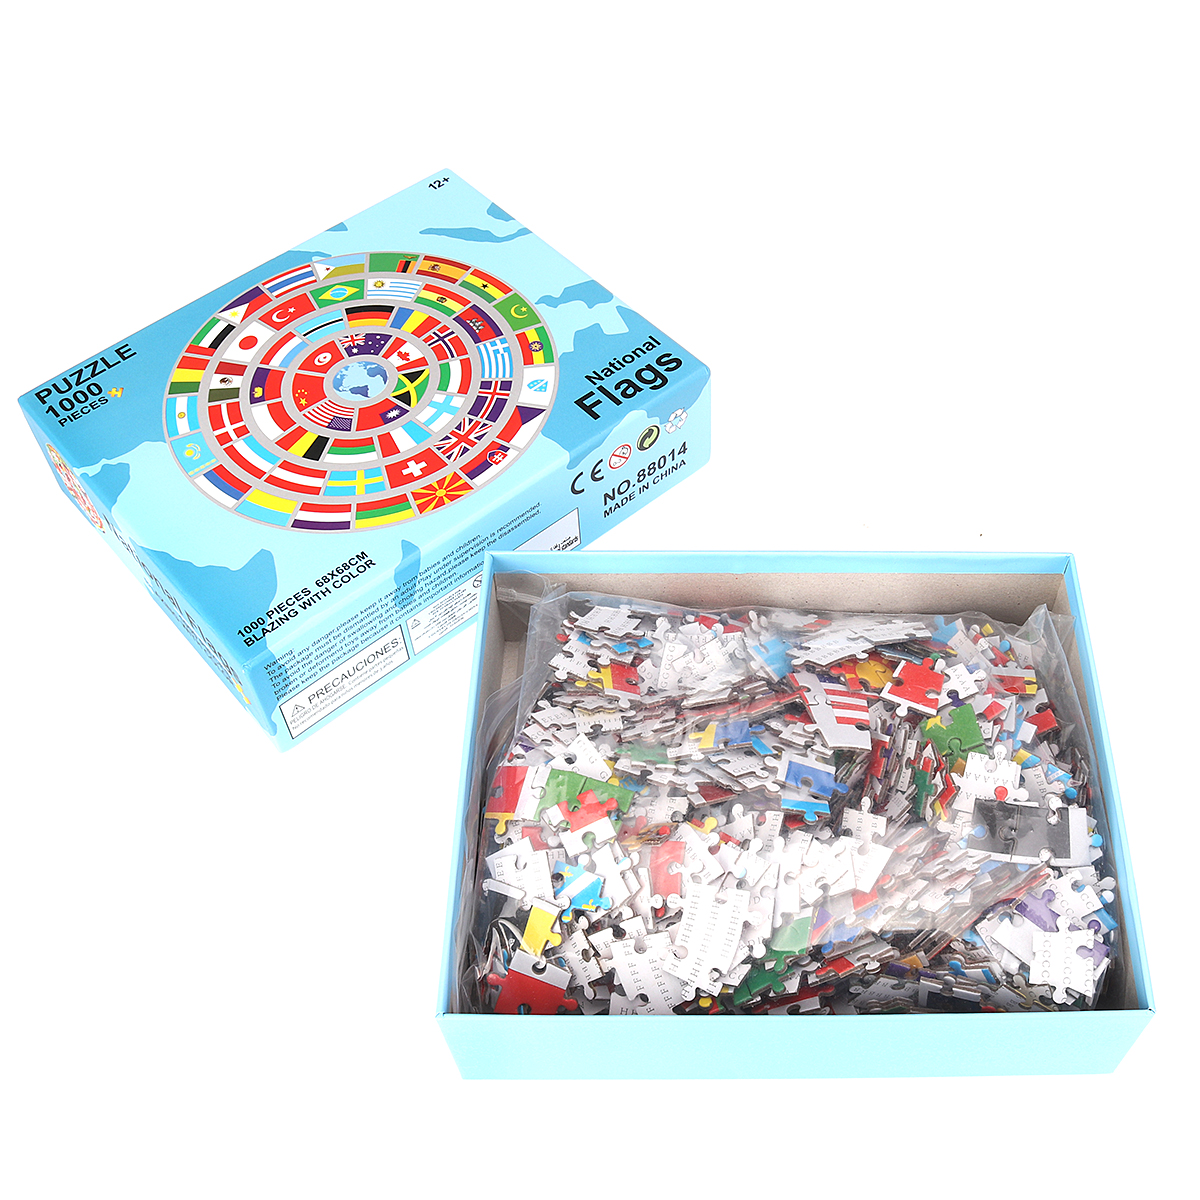 1000Pcs DIY Colorful Arc / National Flag / Delicious Doughnuts Jigsaw Puzzle Suitable for Teenagers and Adults